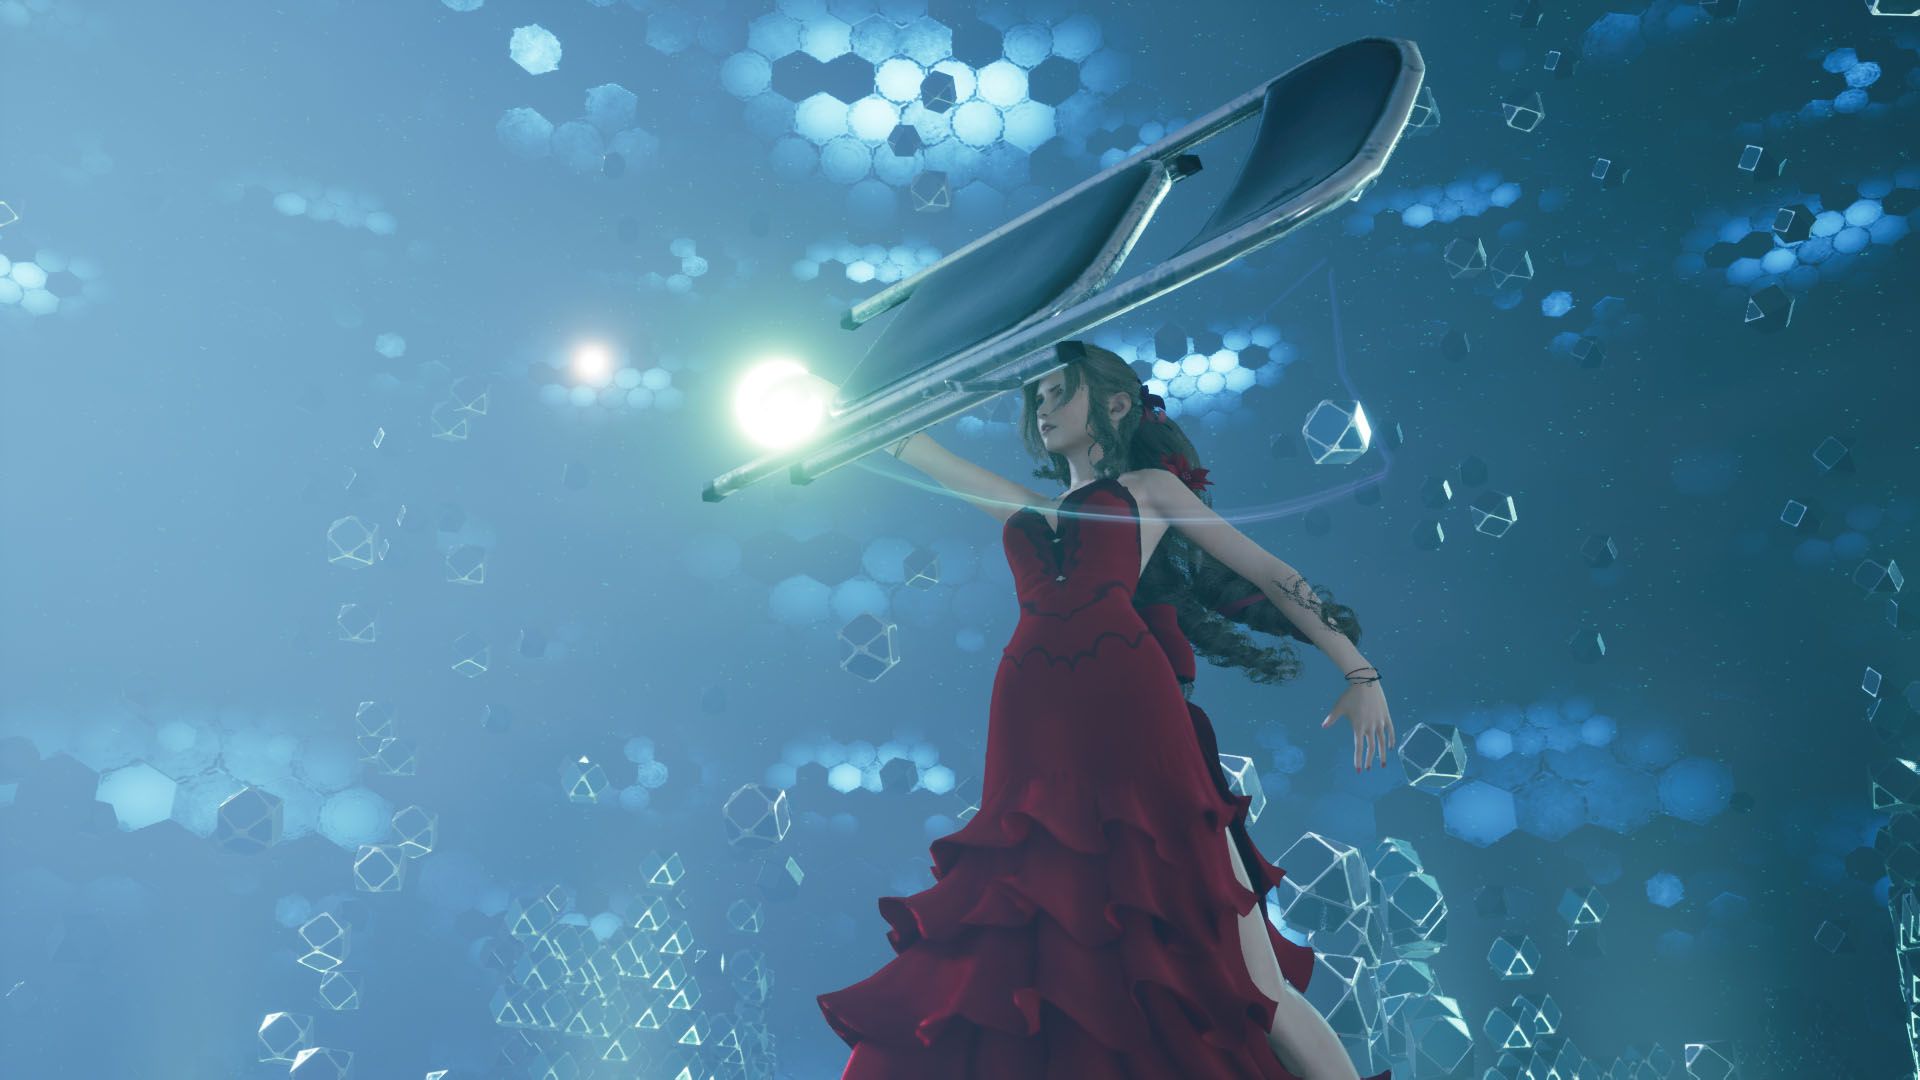 FF7 Remake Mod Makes Aerith’s Iconic Steel Chair A Permanent Weapon